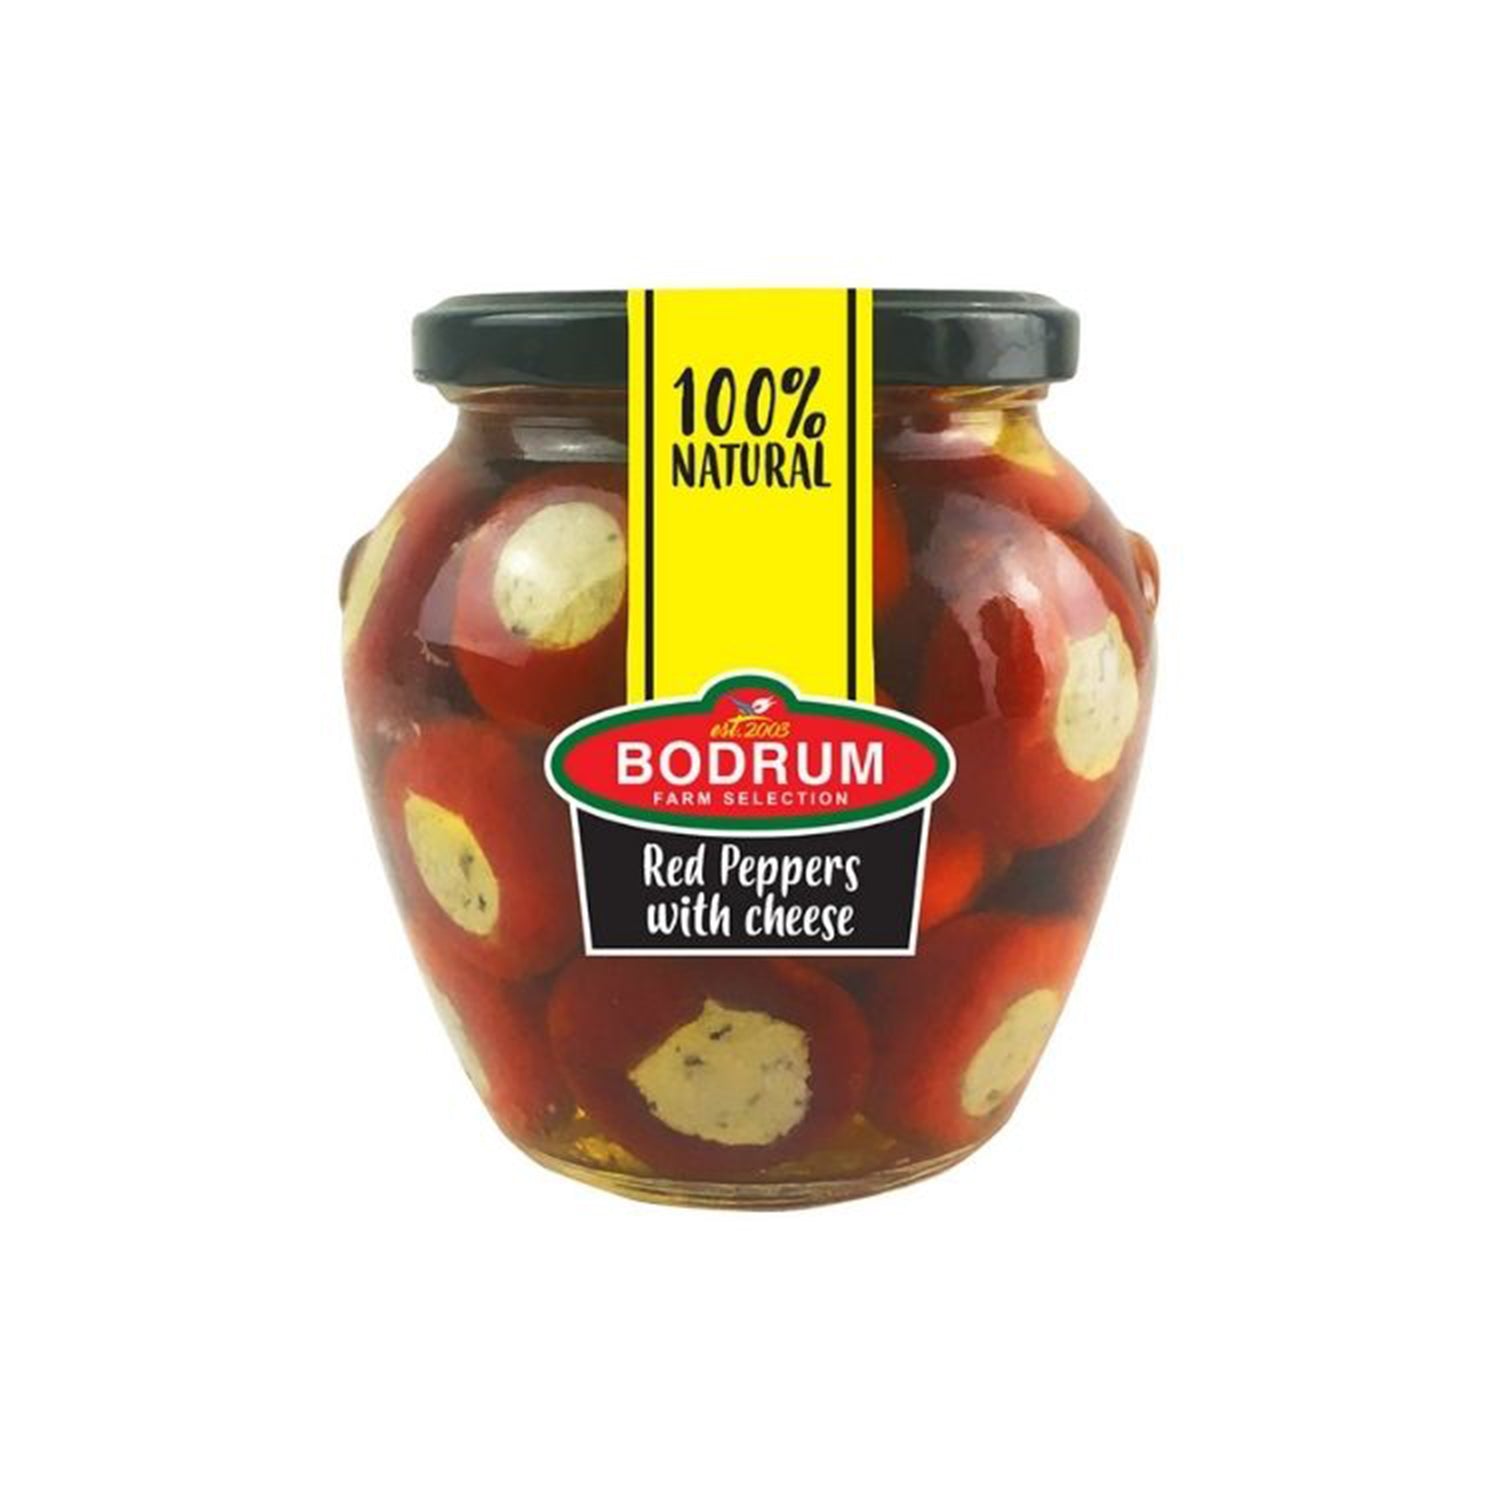 Bodrum Red Peppers with Cheese 520g